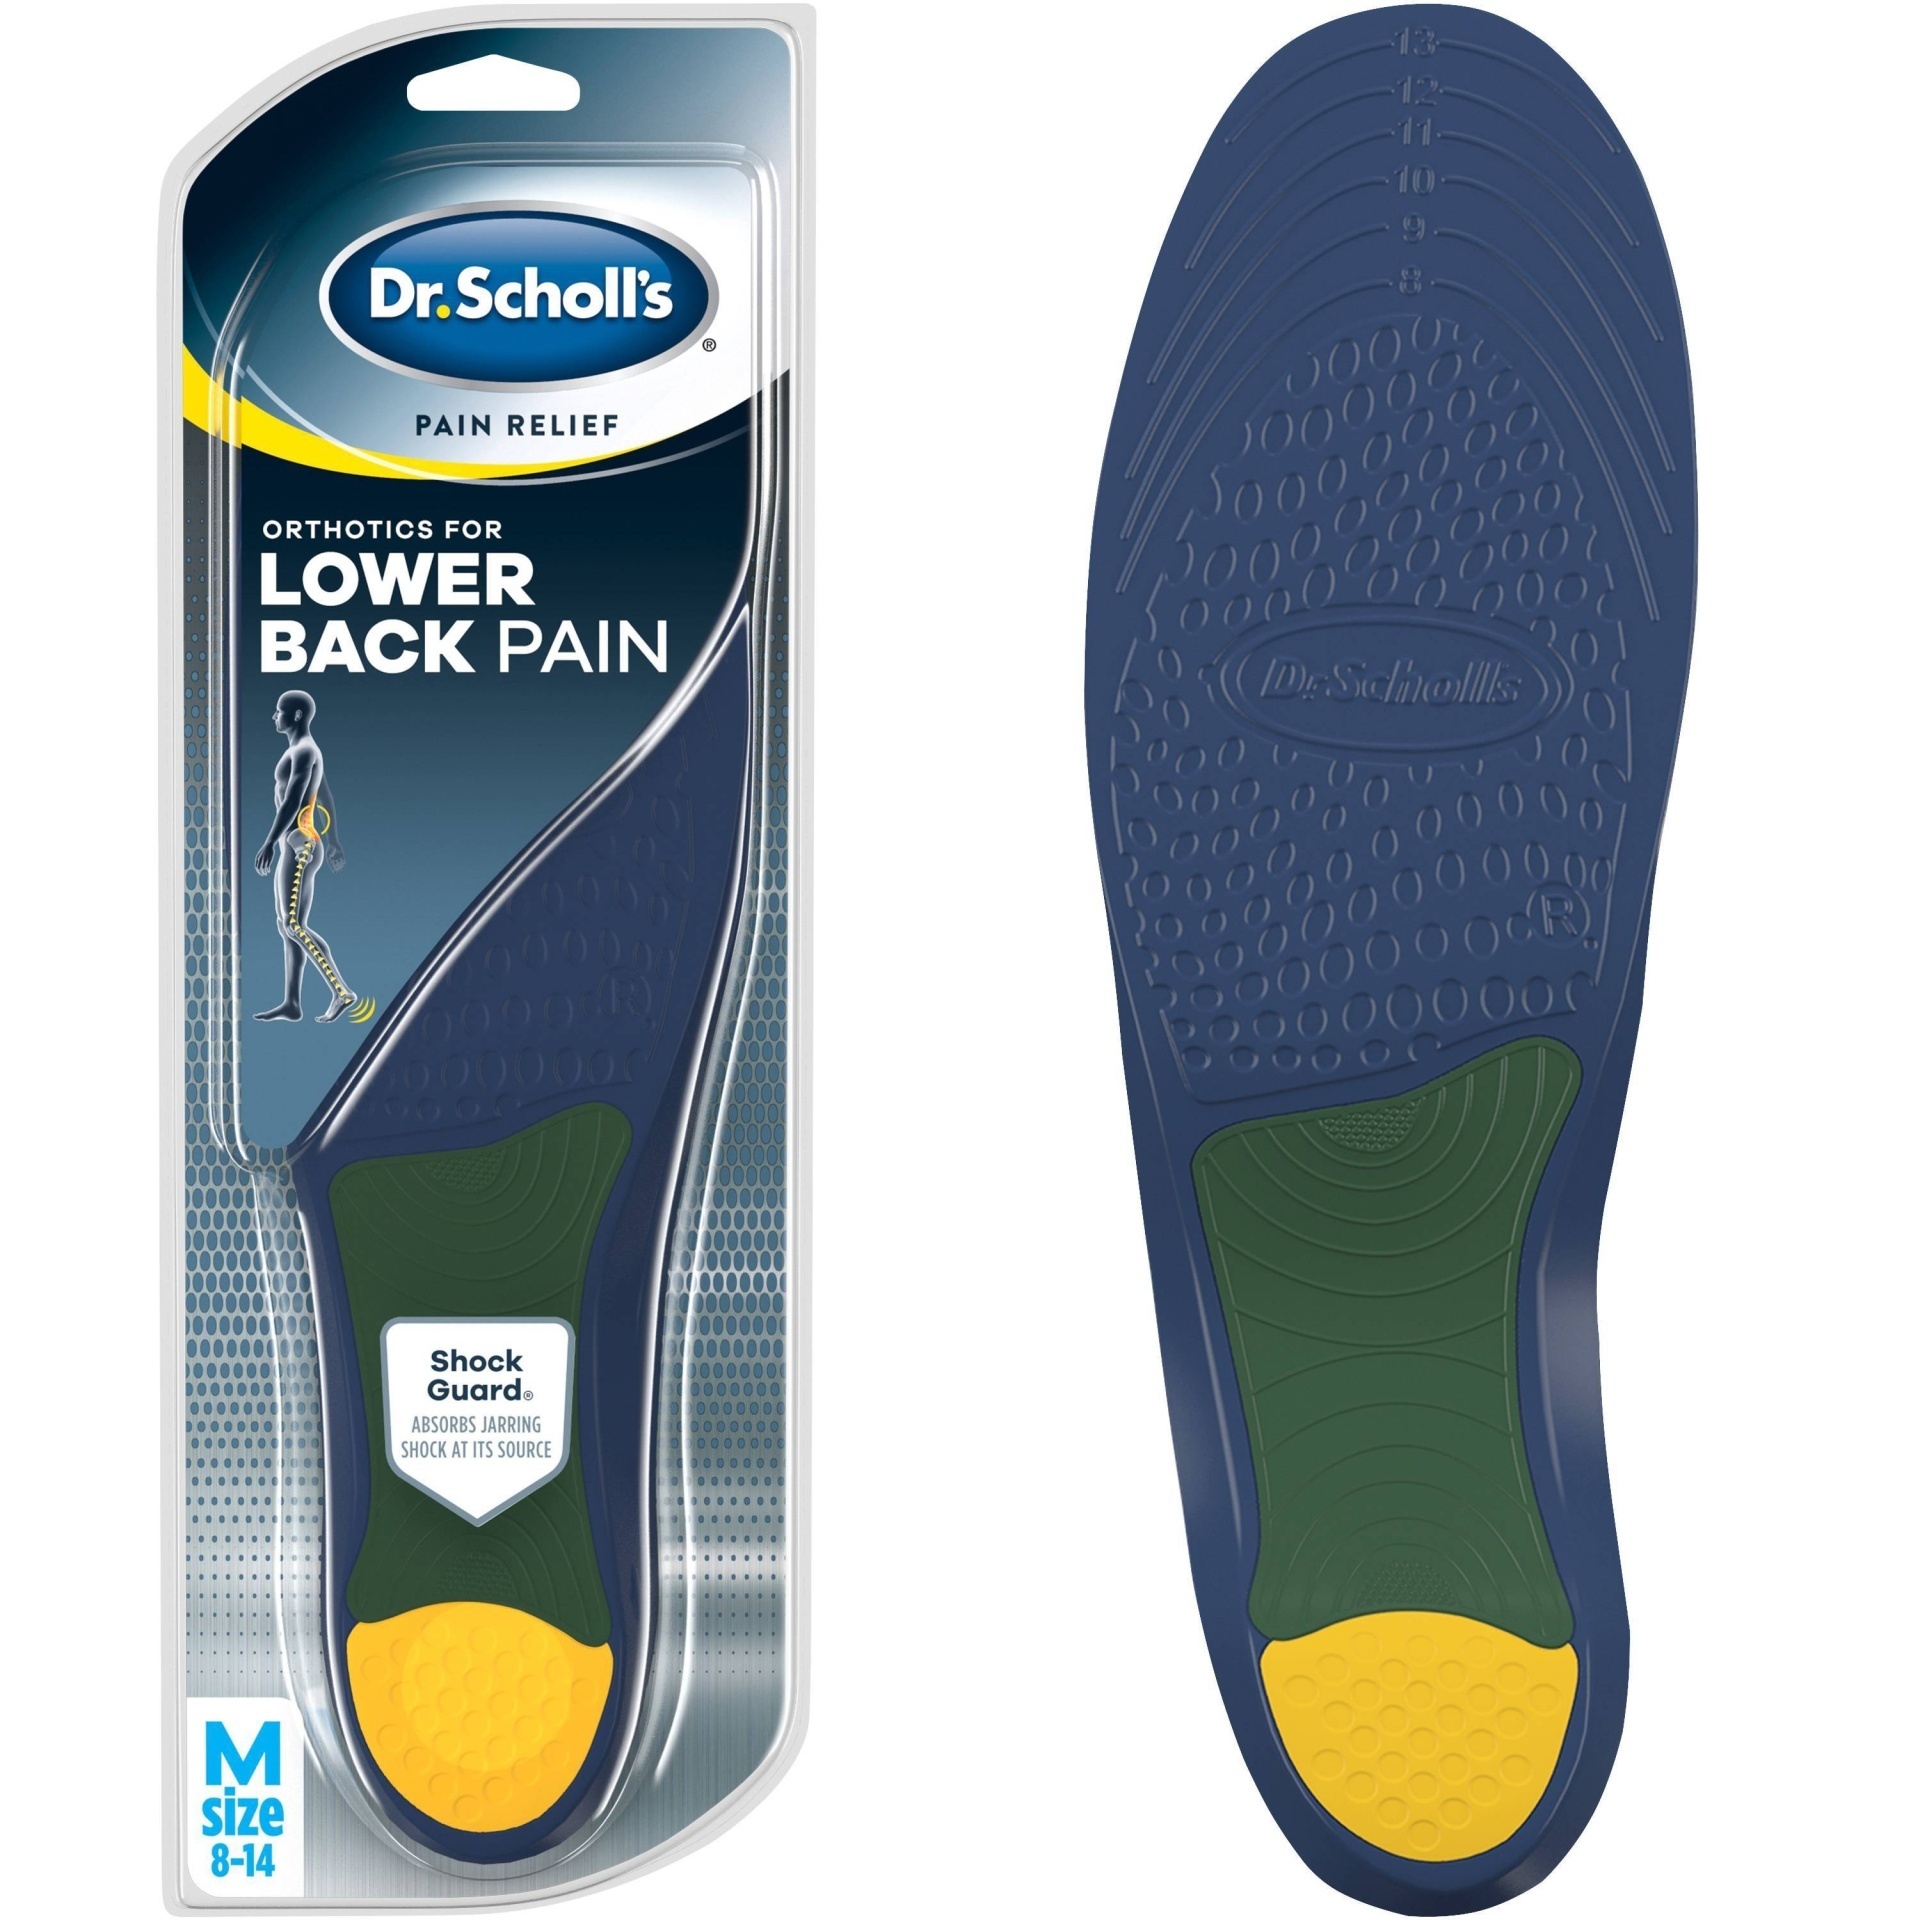 Dr. Scholl's Athletic Series Men's Running Insoles 1 pair | Shipt